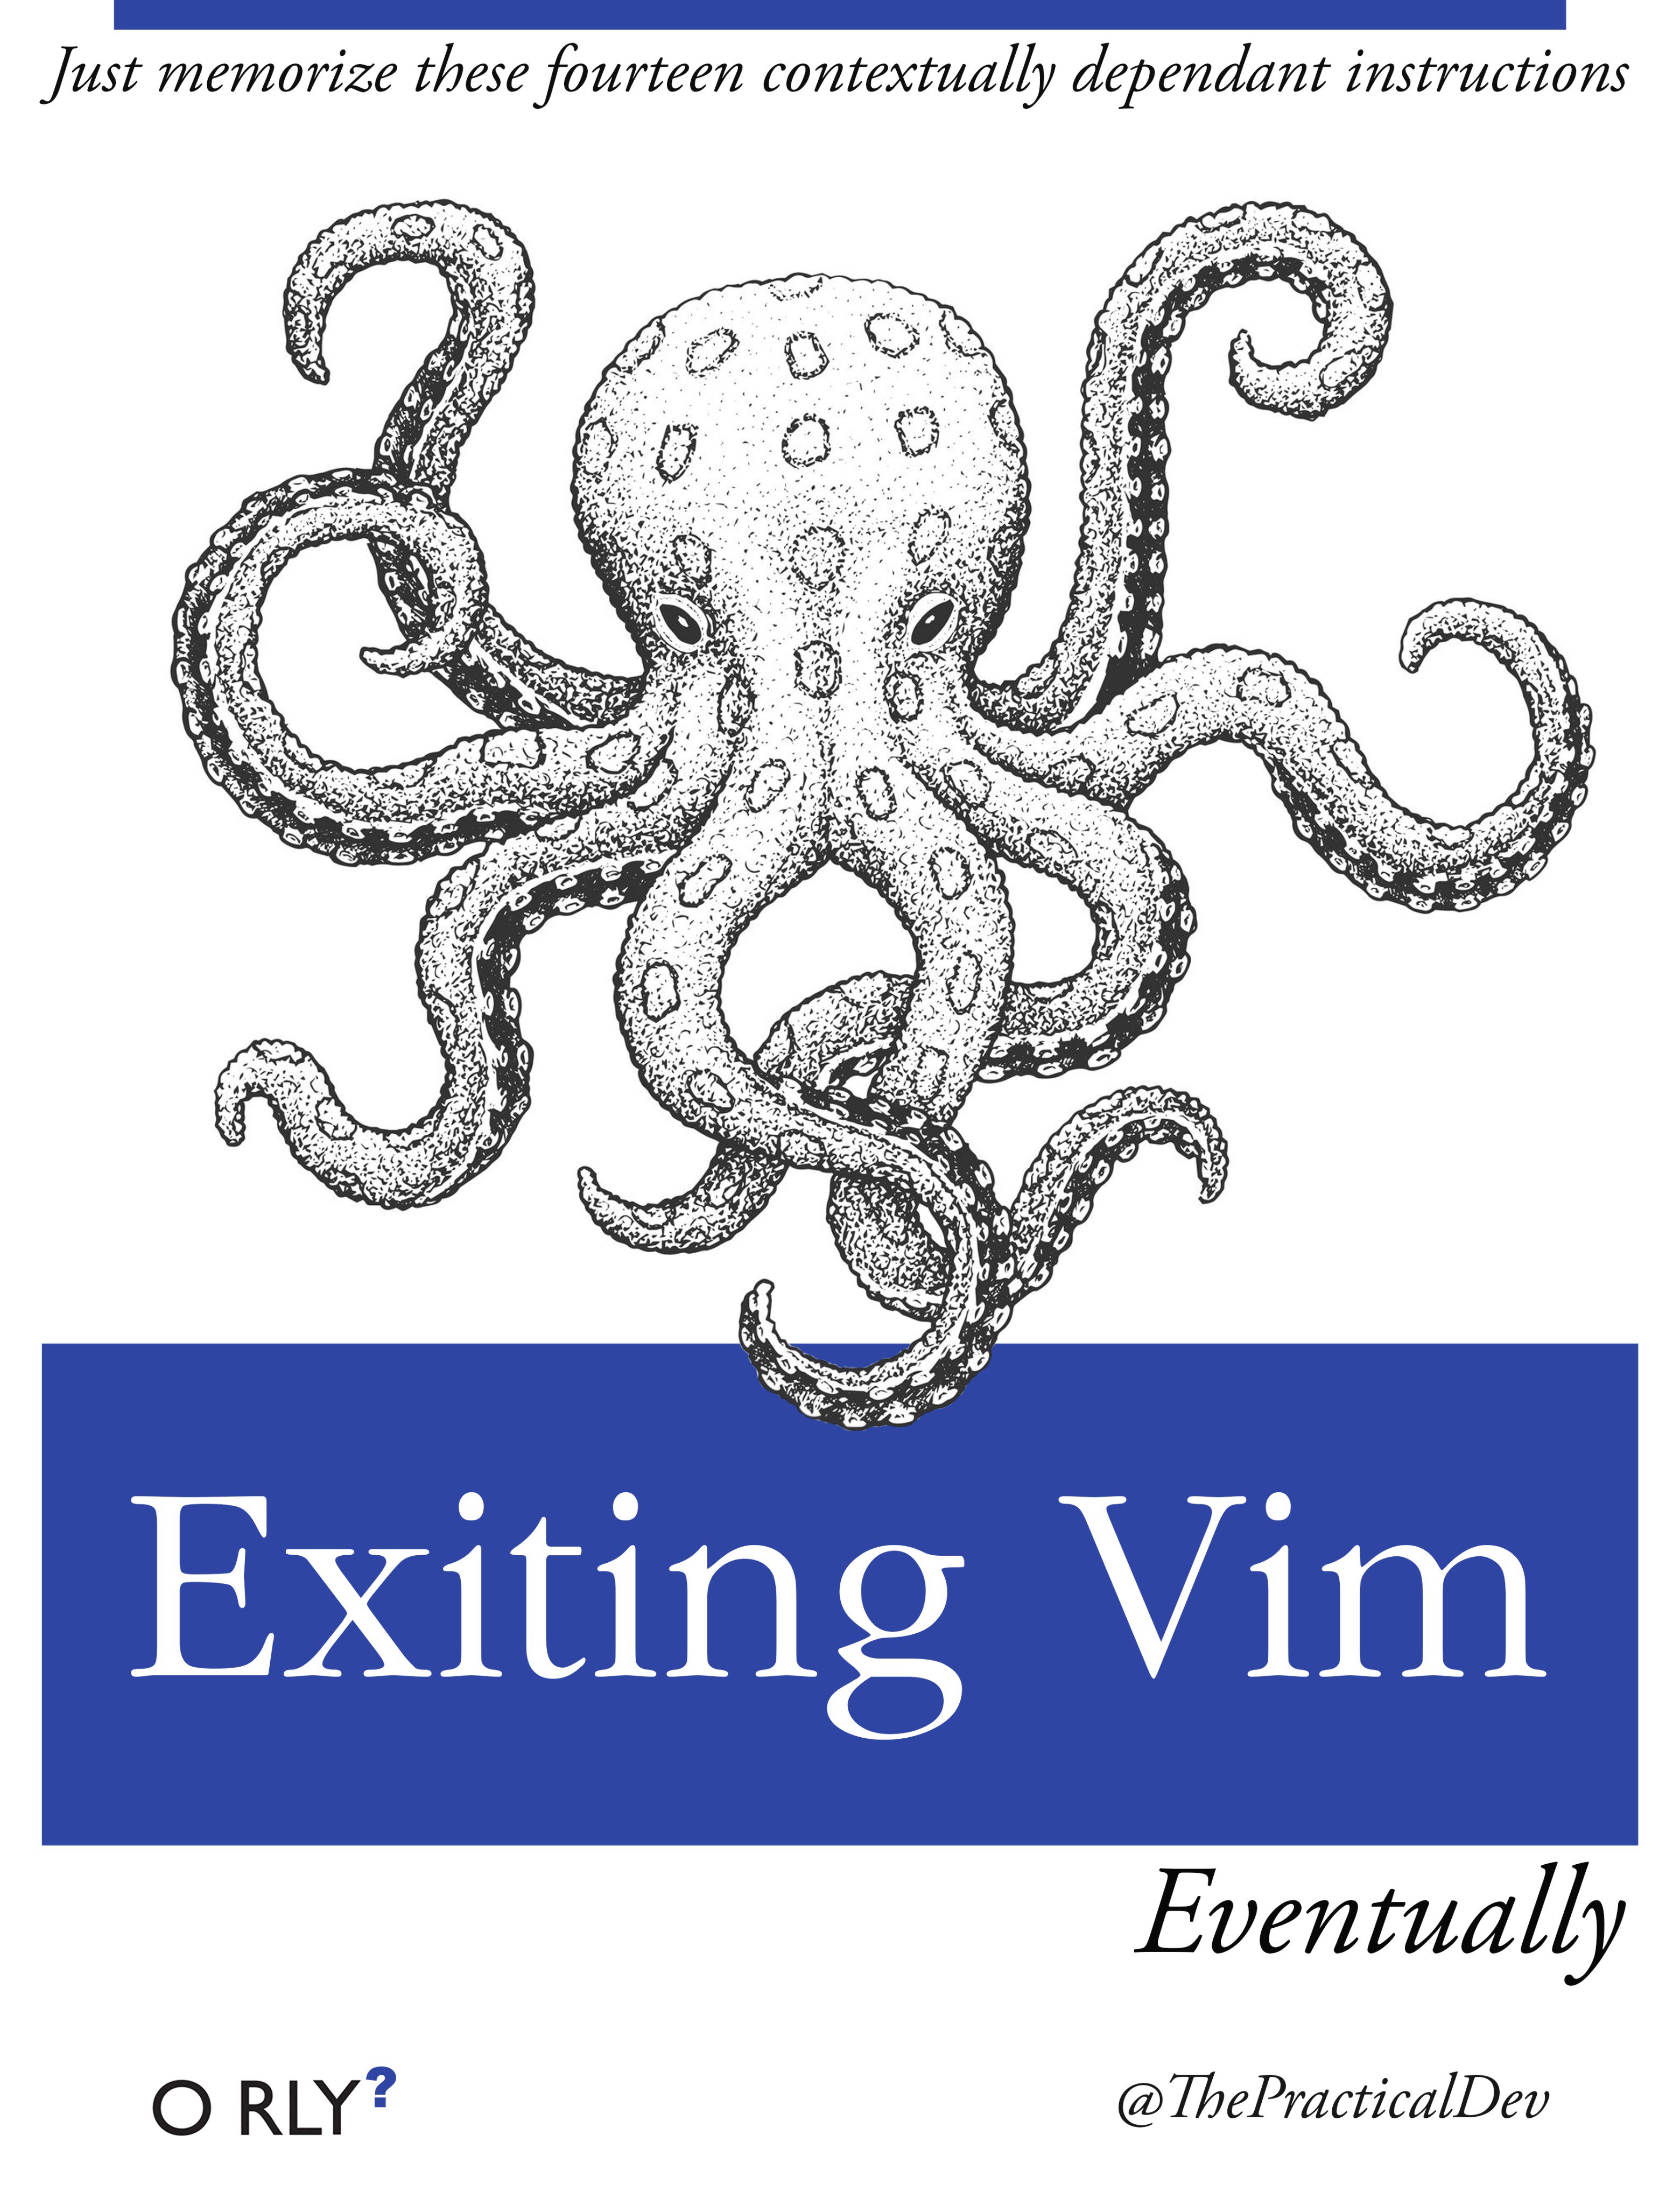 O RLY funny book cover parody about exiting vim is hard